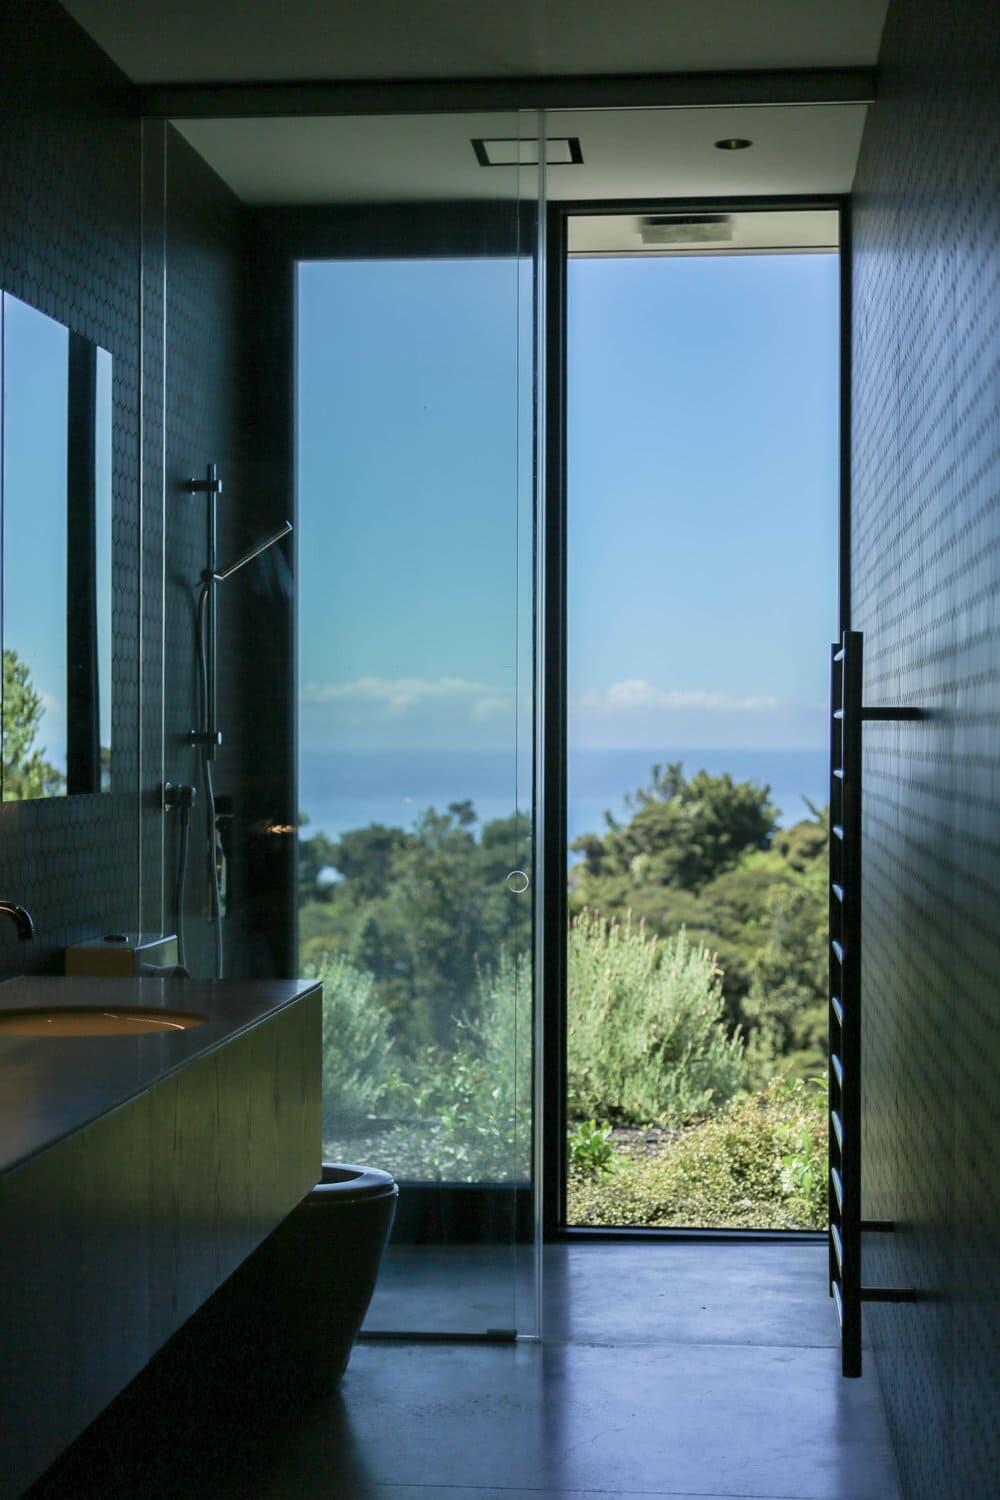 The bathroom on the lower level has a view of bush and sea